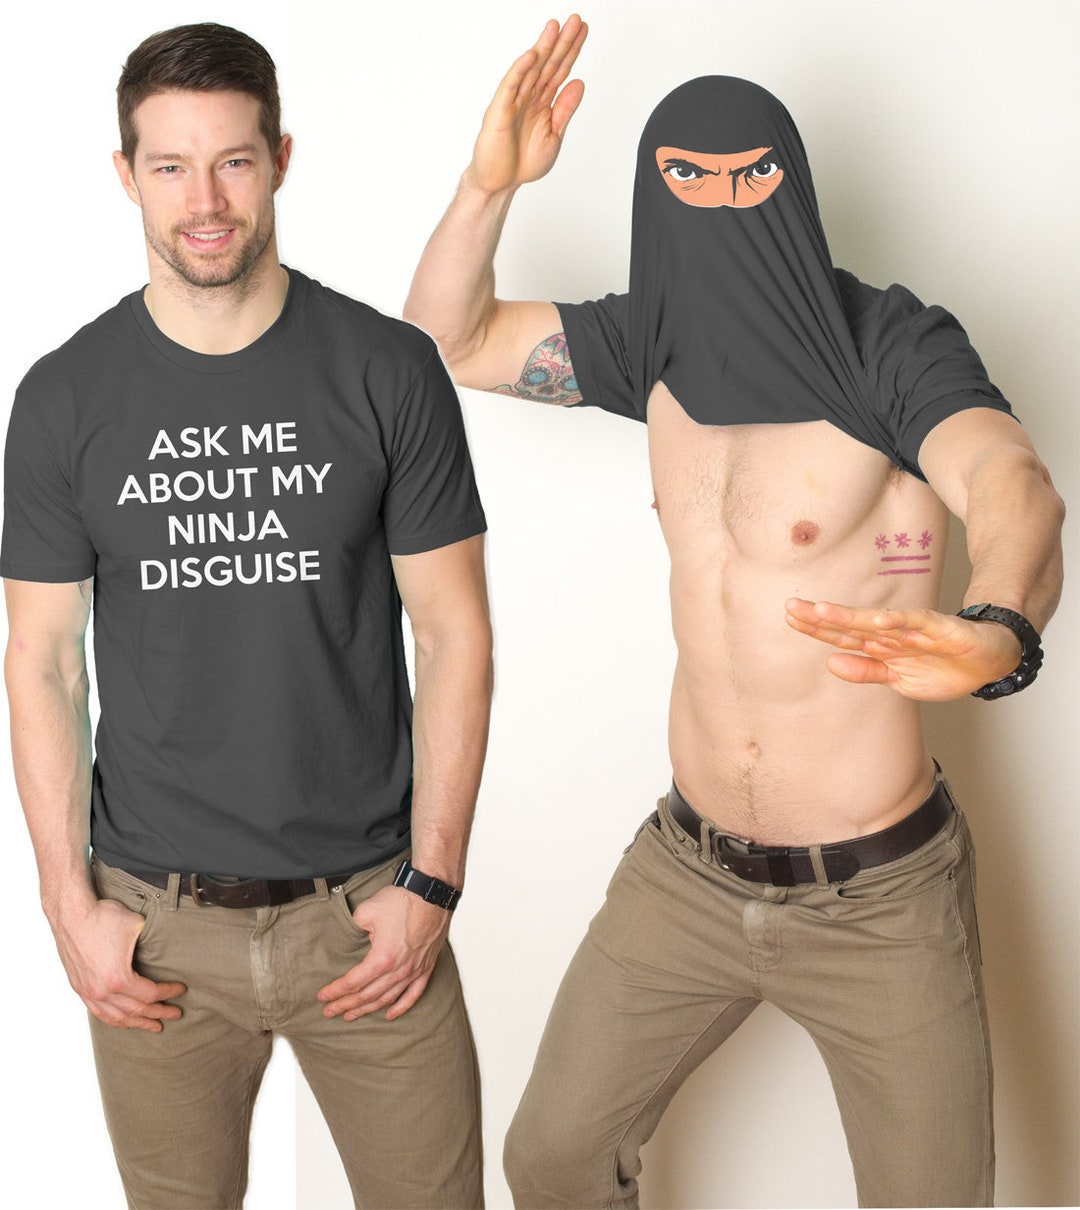 Mens Ask Me About My Ninja Disguise Flip T shirt Funny Costume Graphic  Humor Tee (Black) - 3XL Graphic Tees